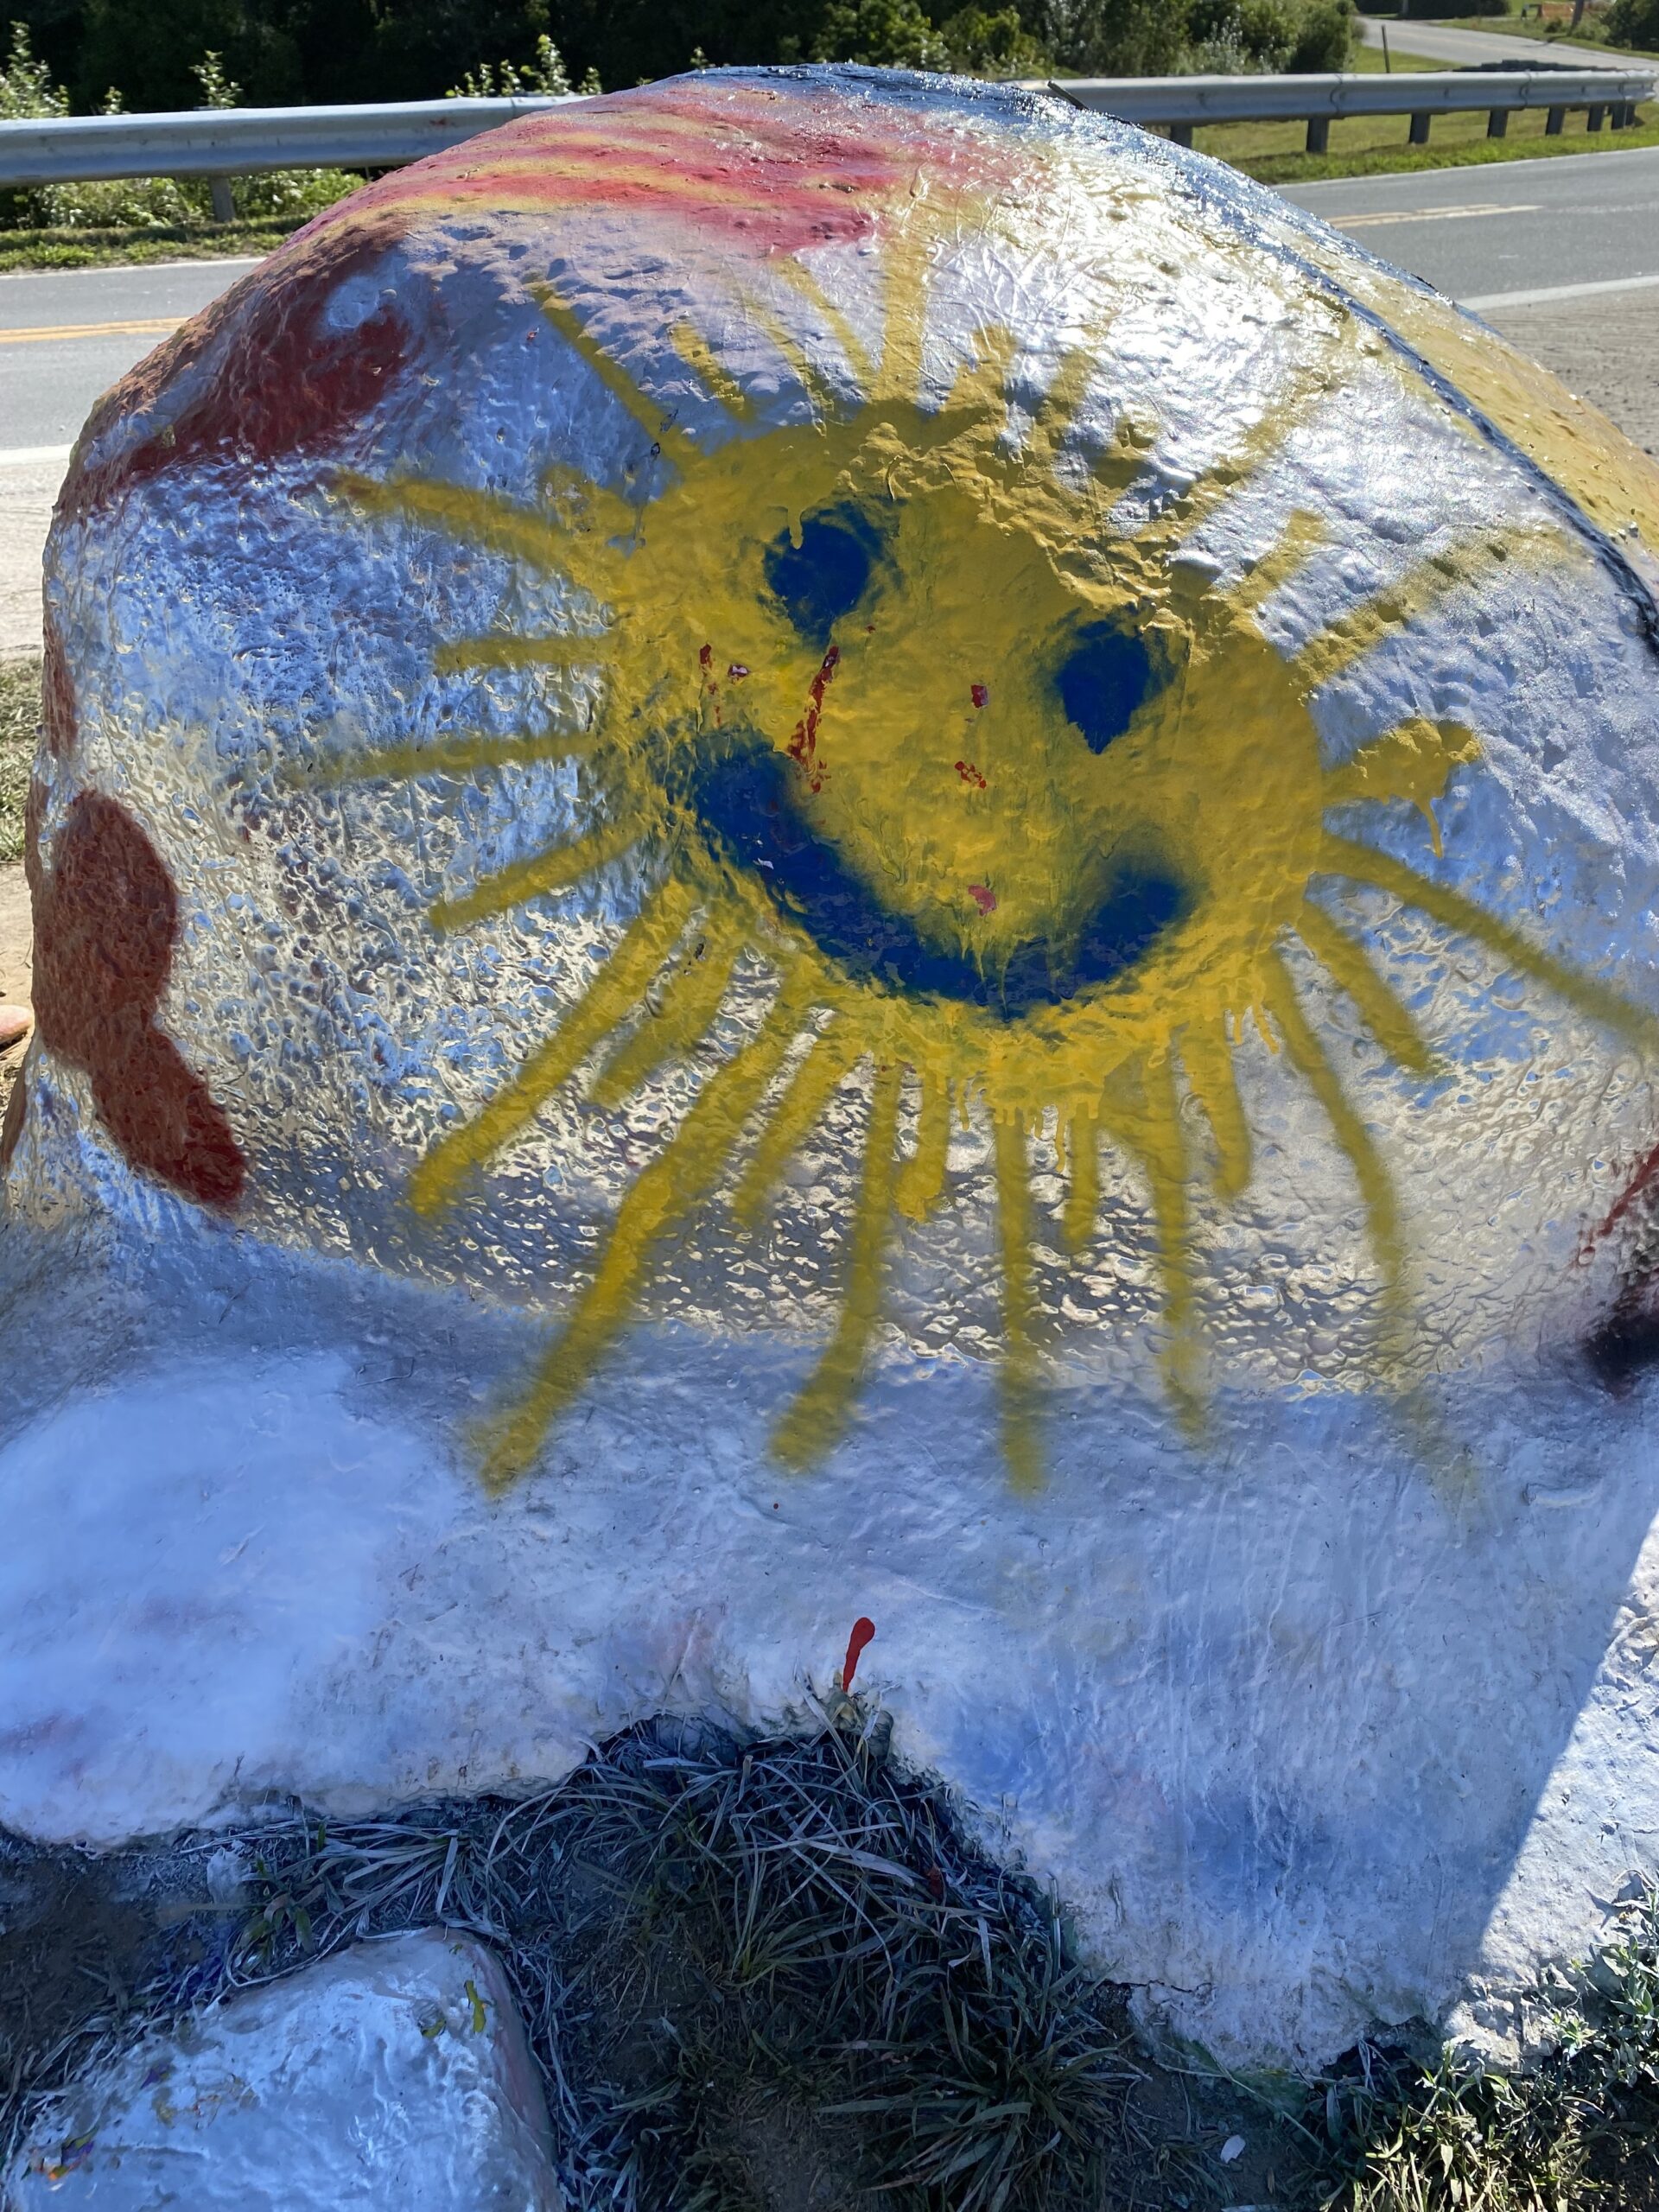 large boulder painted with a bright yellow smiley face in the shape of the sun